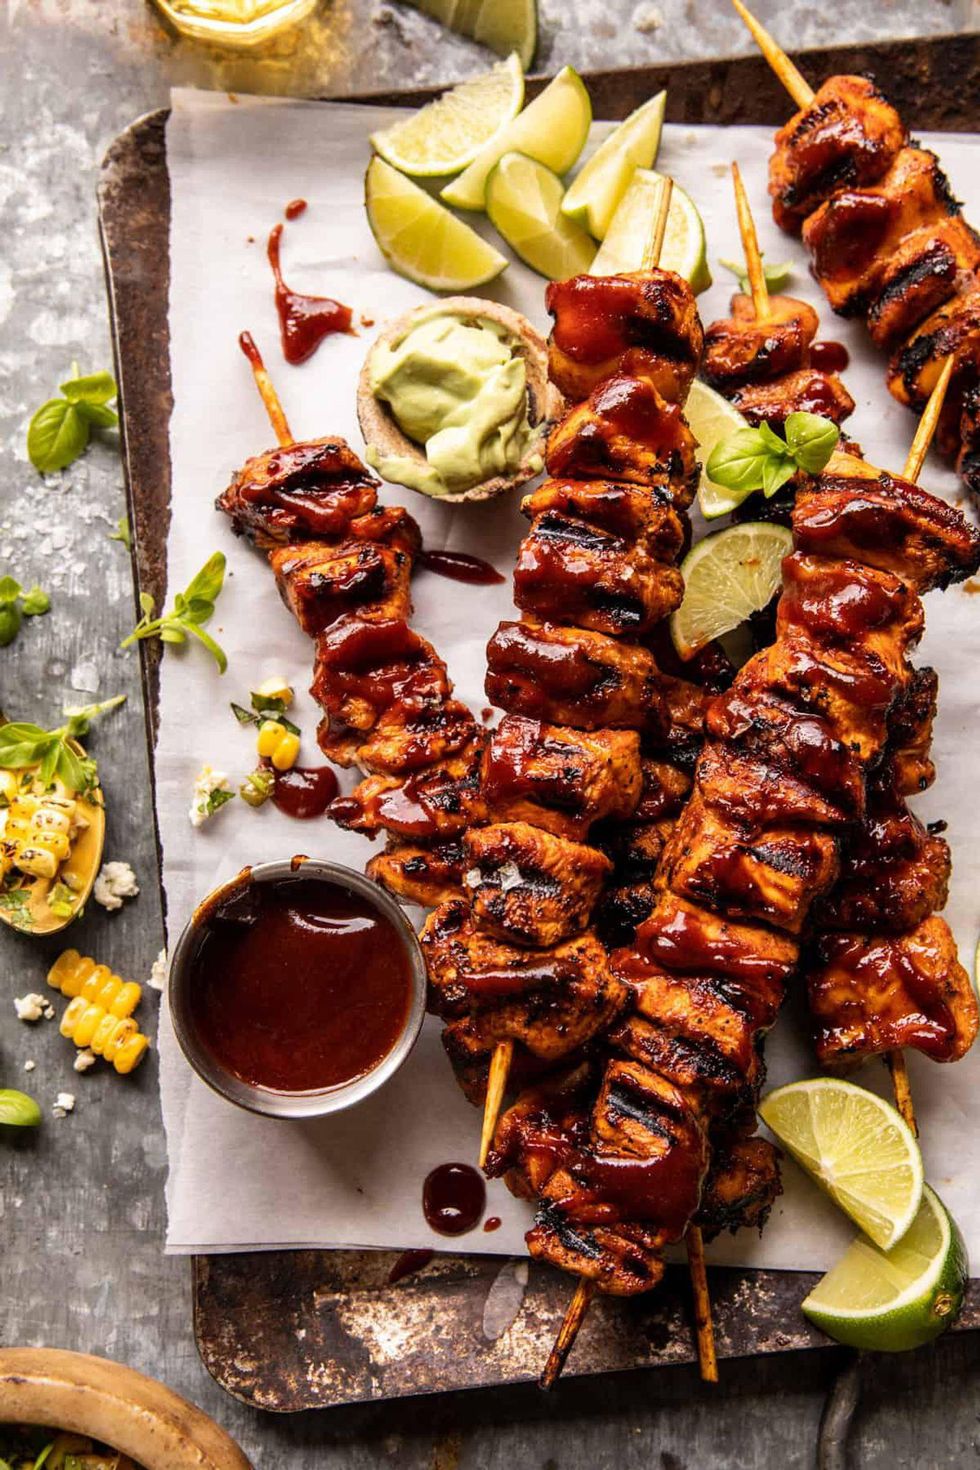 Spicy Beer BBQ Chicken Skewers with Avocado Corn and Feta Salsa Camping Foods